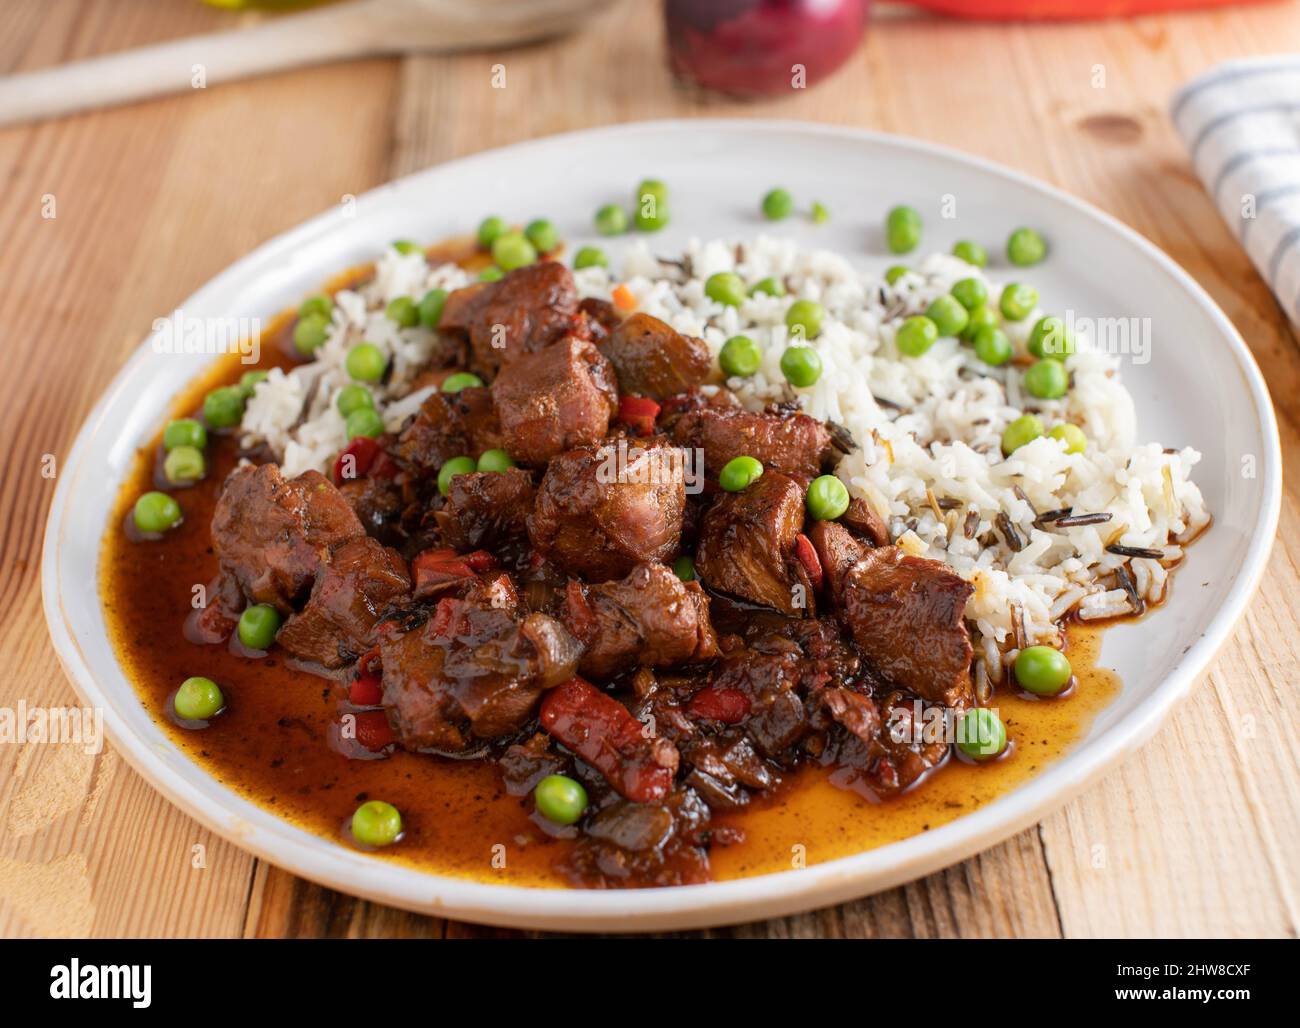 Stew with rice and vegetable Stock Photo